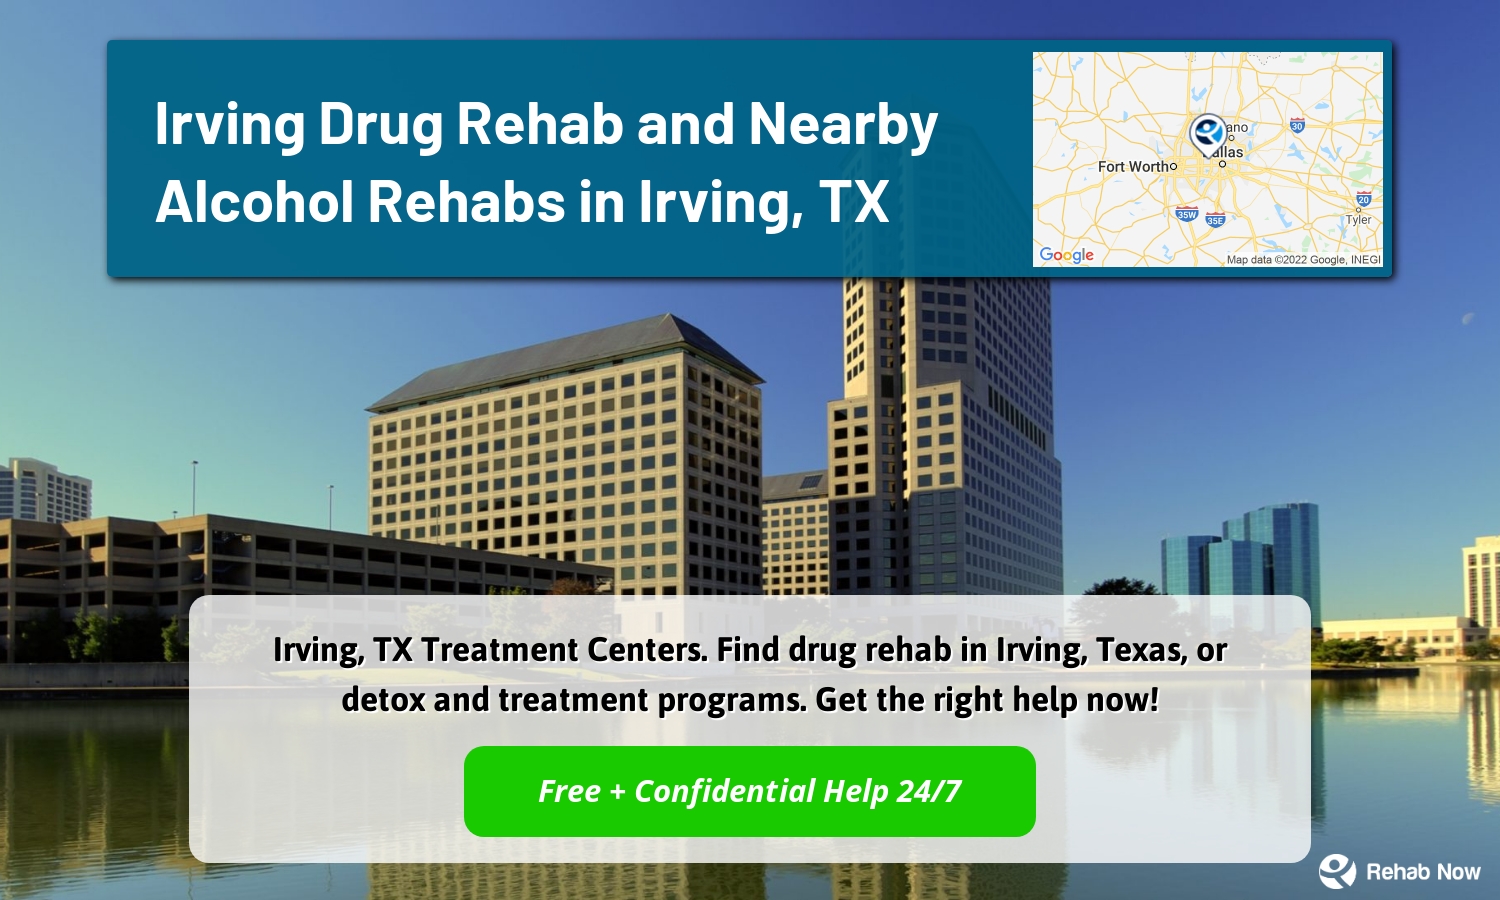 Irving, TX Treatment Centers. Find drug rehab in Irving, Texas, or detox and treatment programs. Get the right help now!